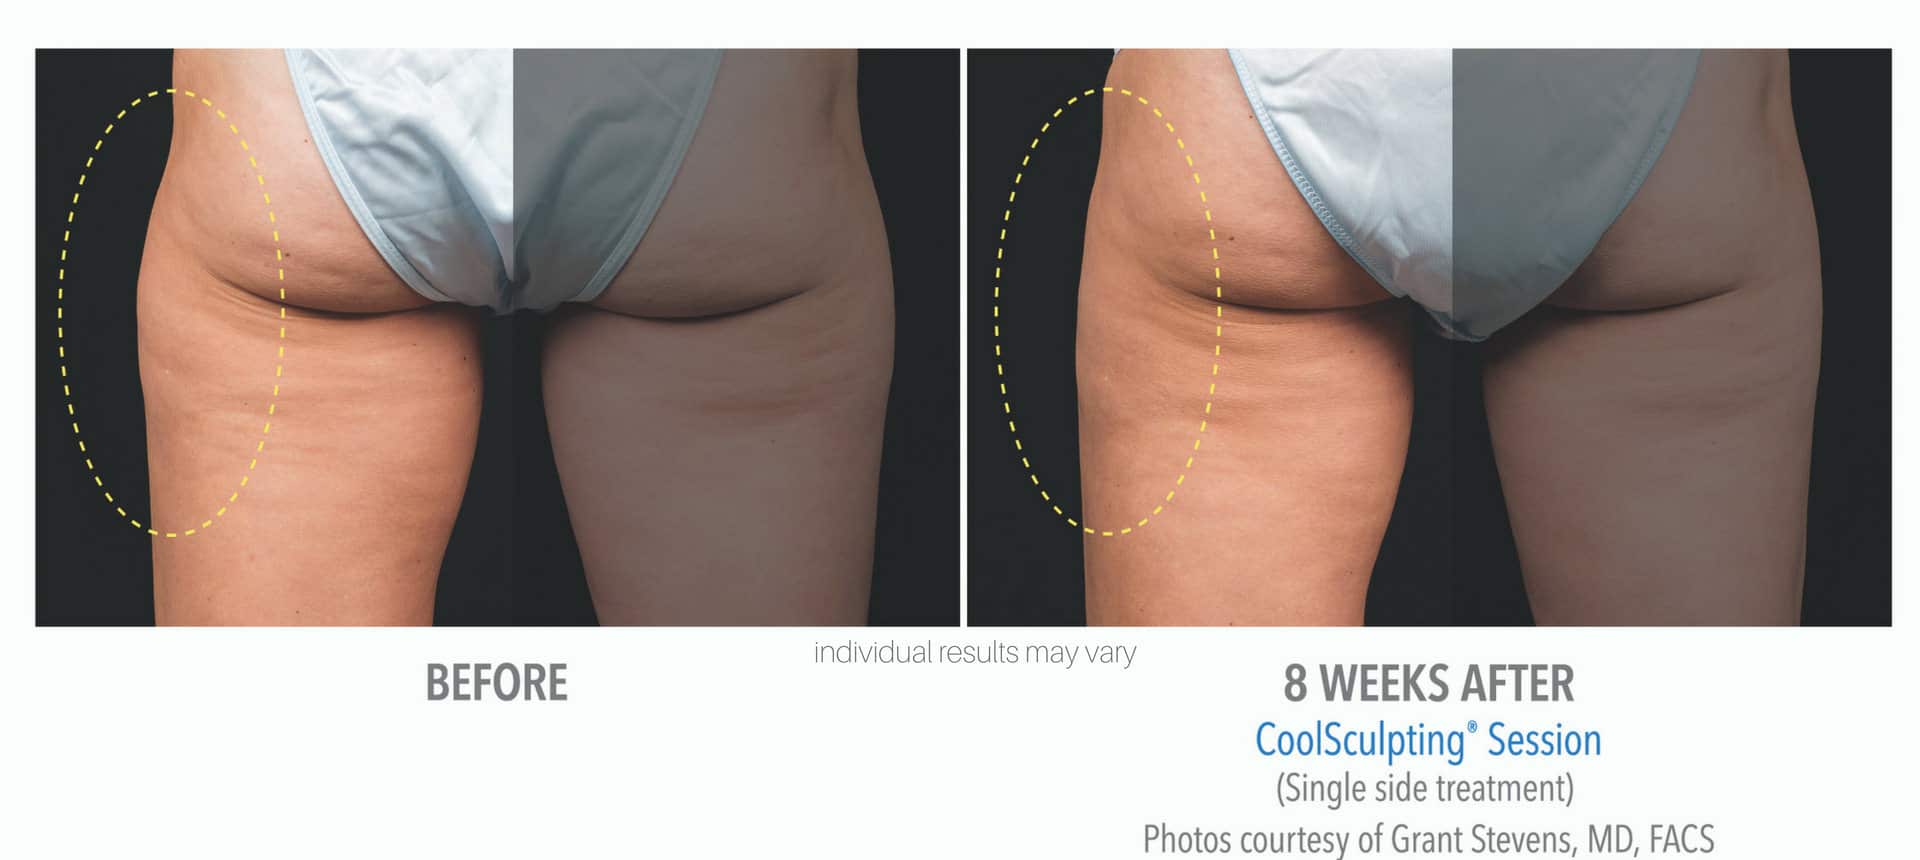 Womans buttocks before and after coolsculpting treatment.